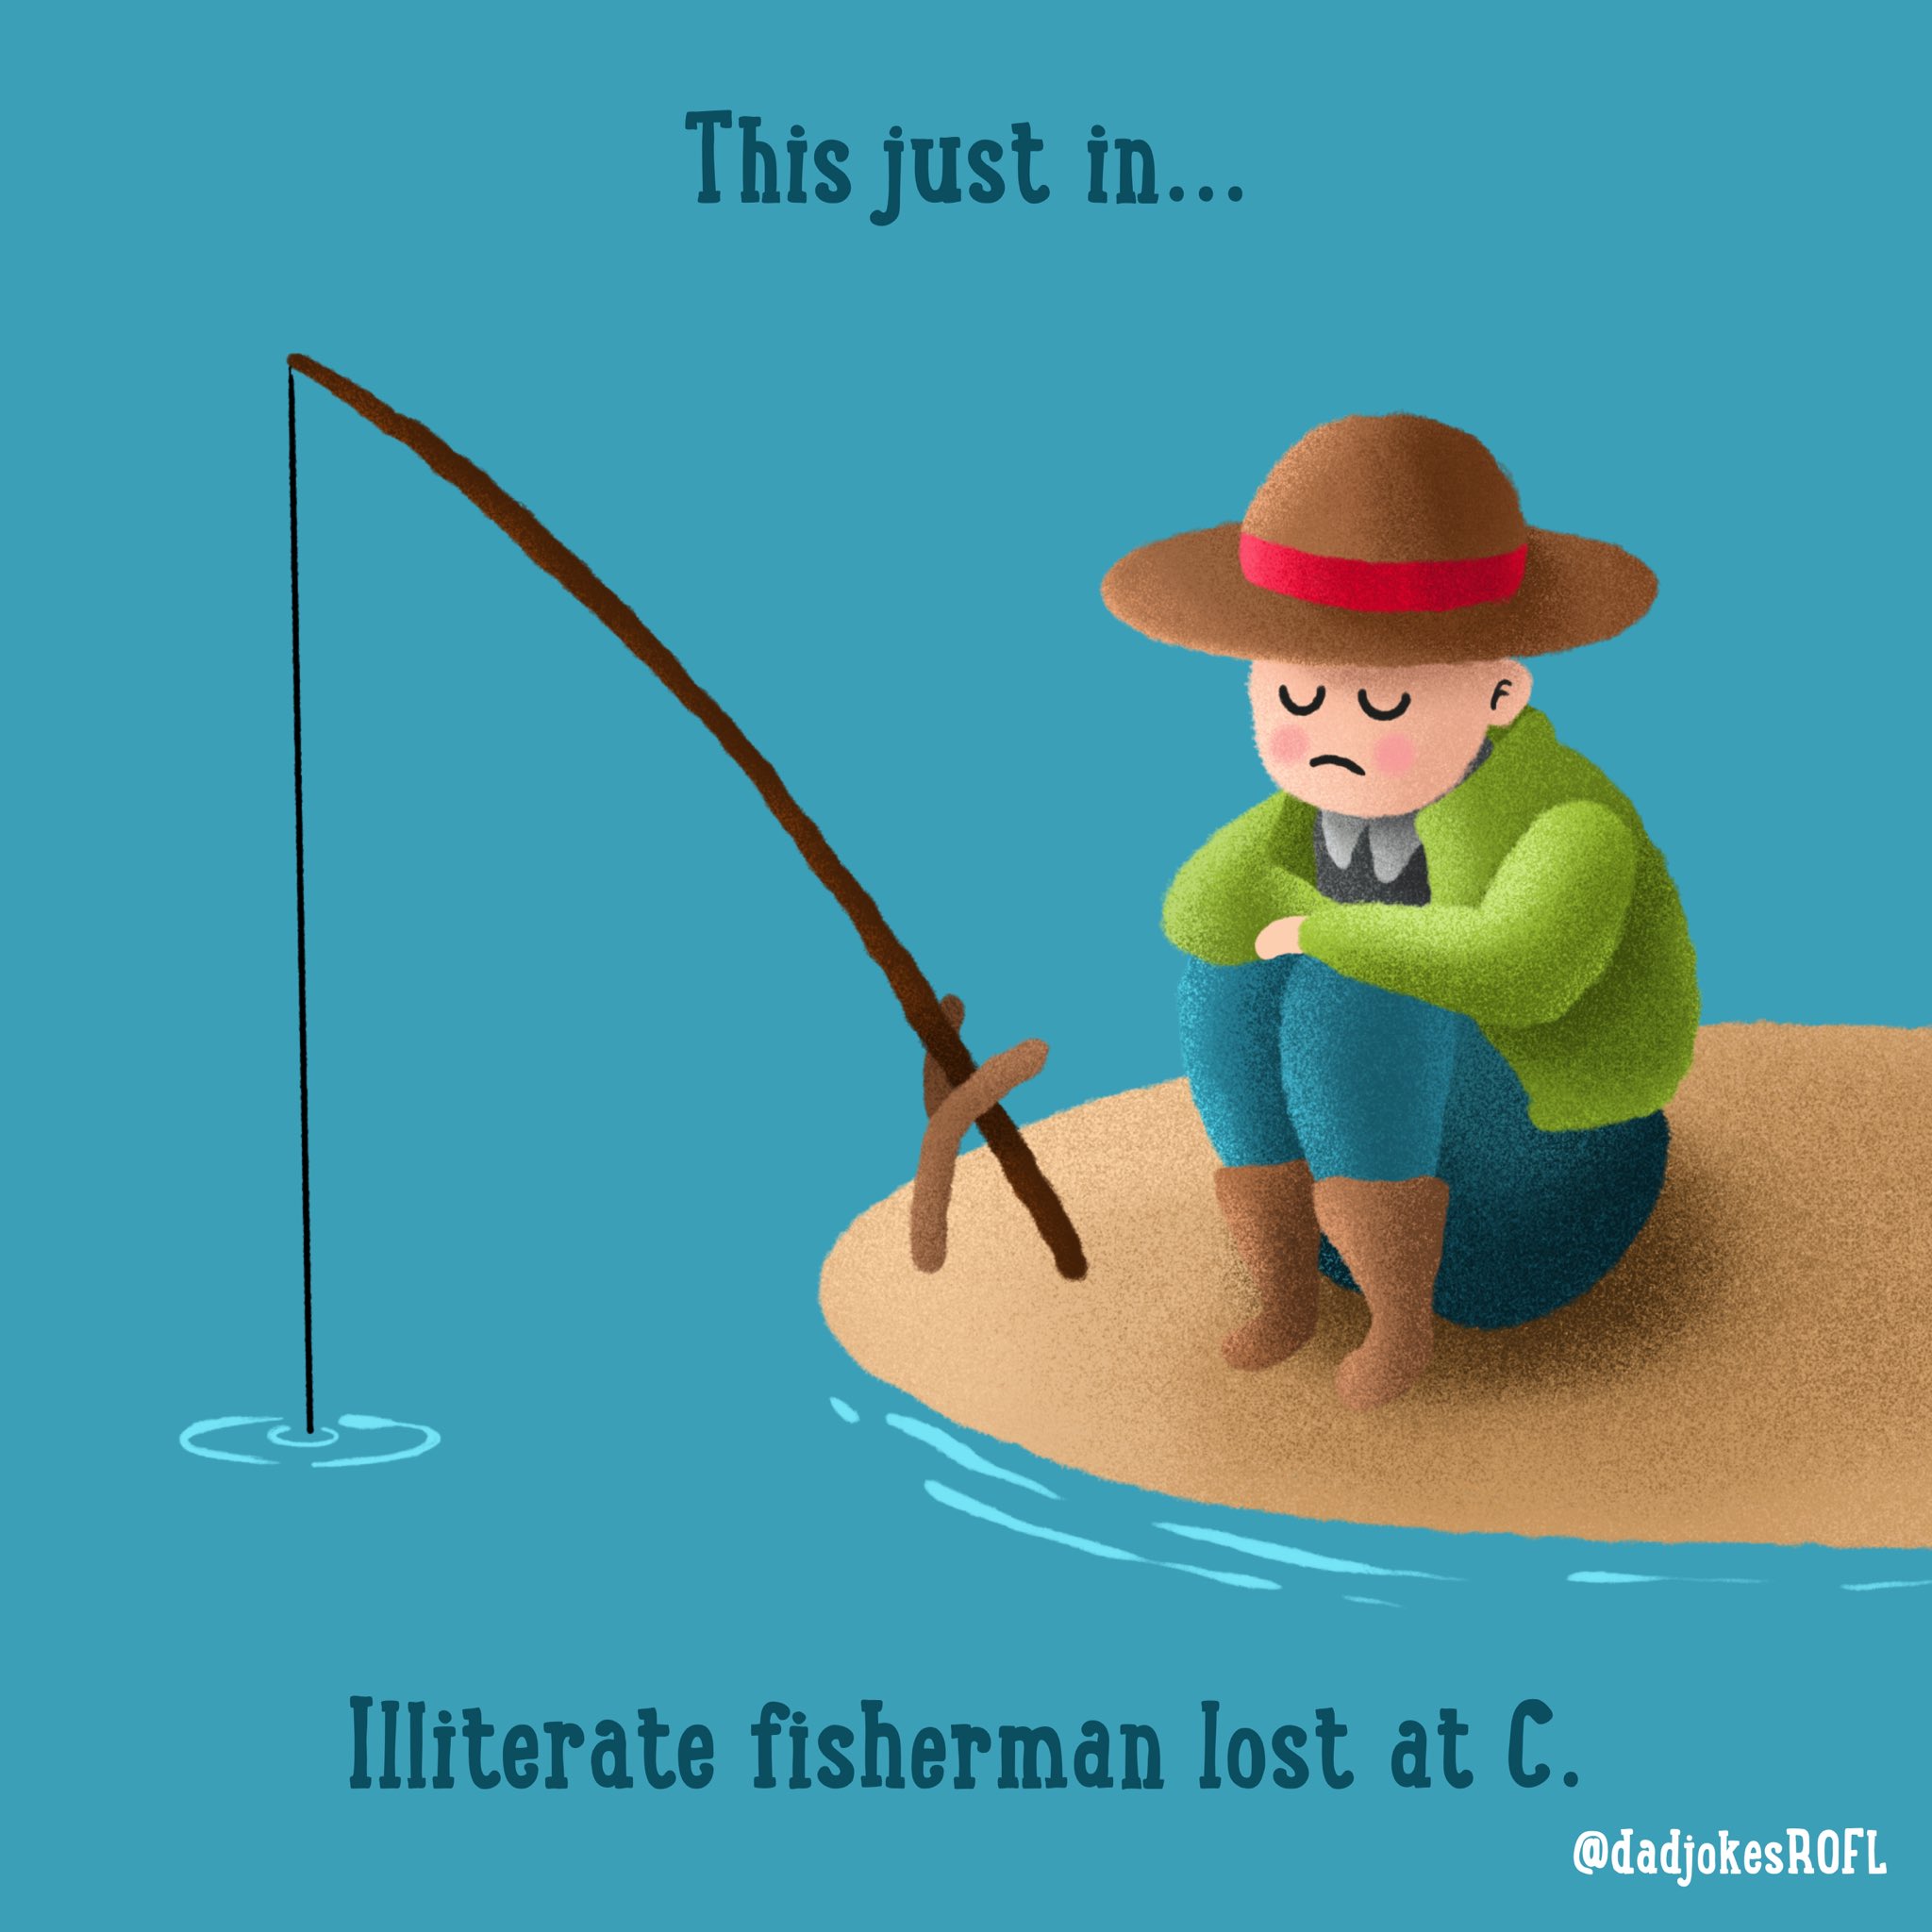 Learn Funny Jokes on X: This just in Illiterate fisherman lost